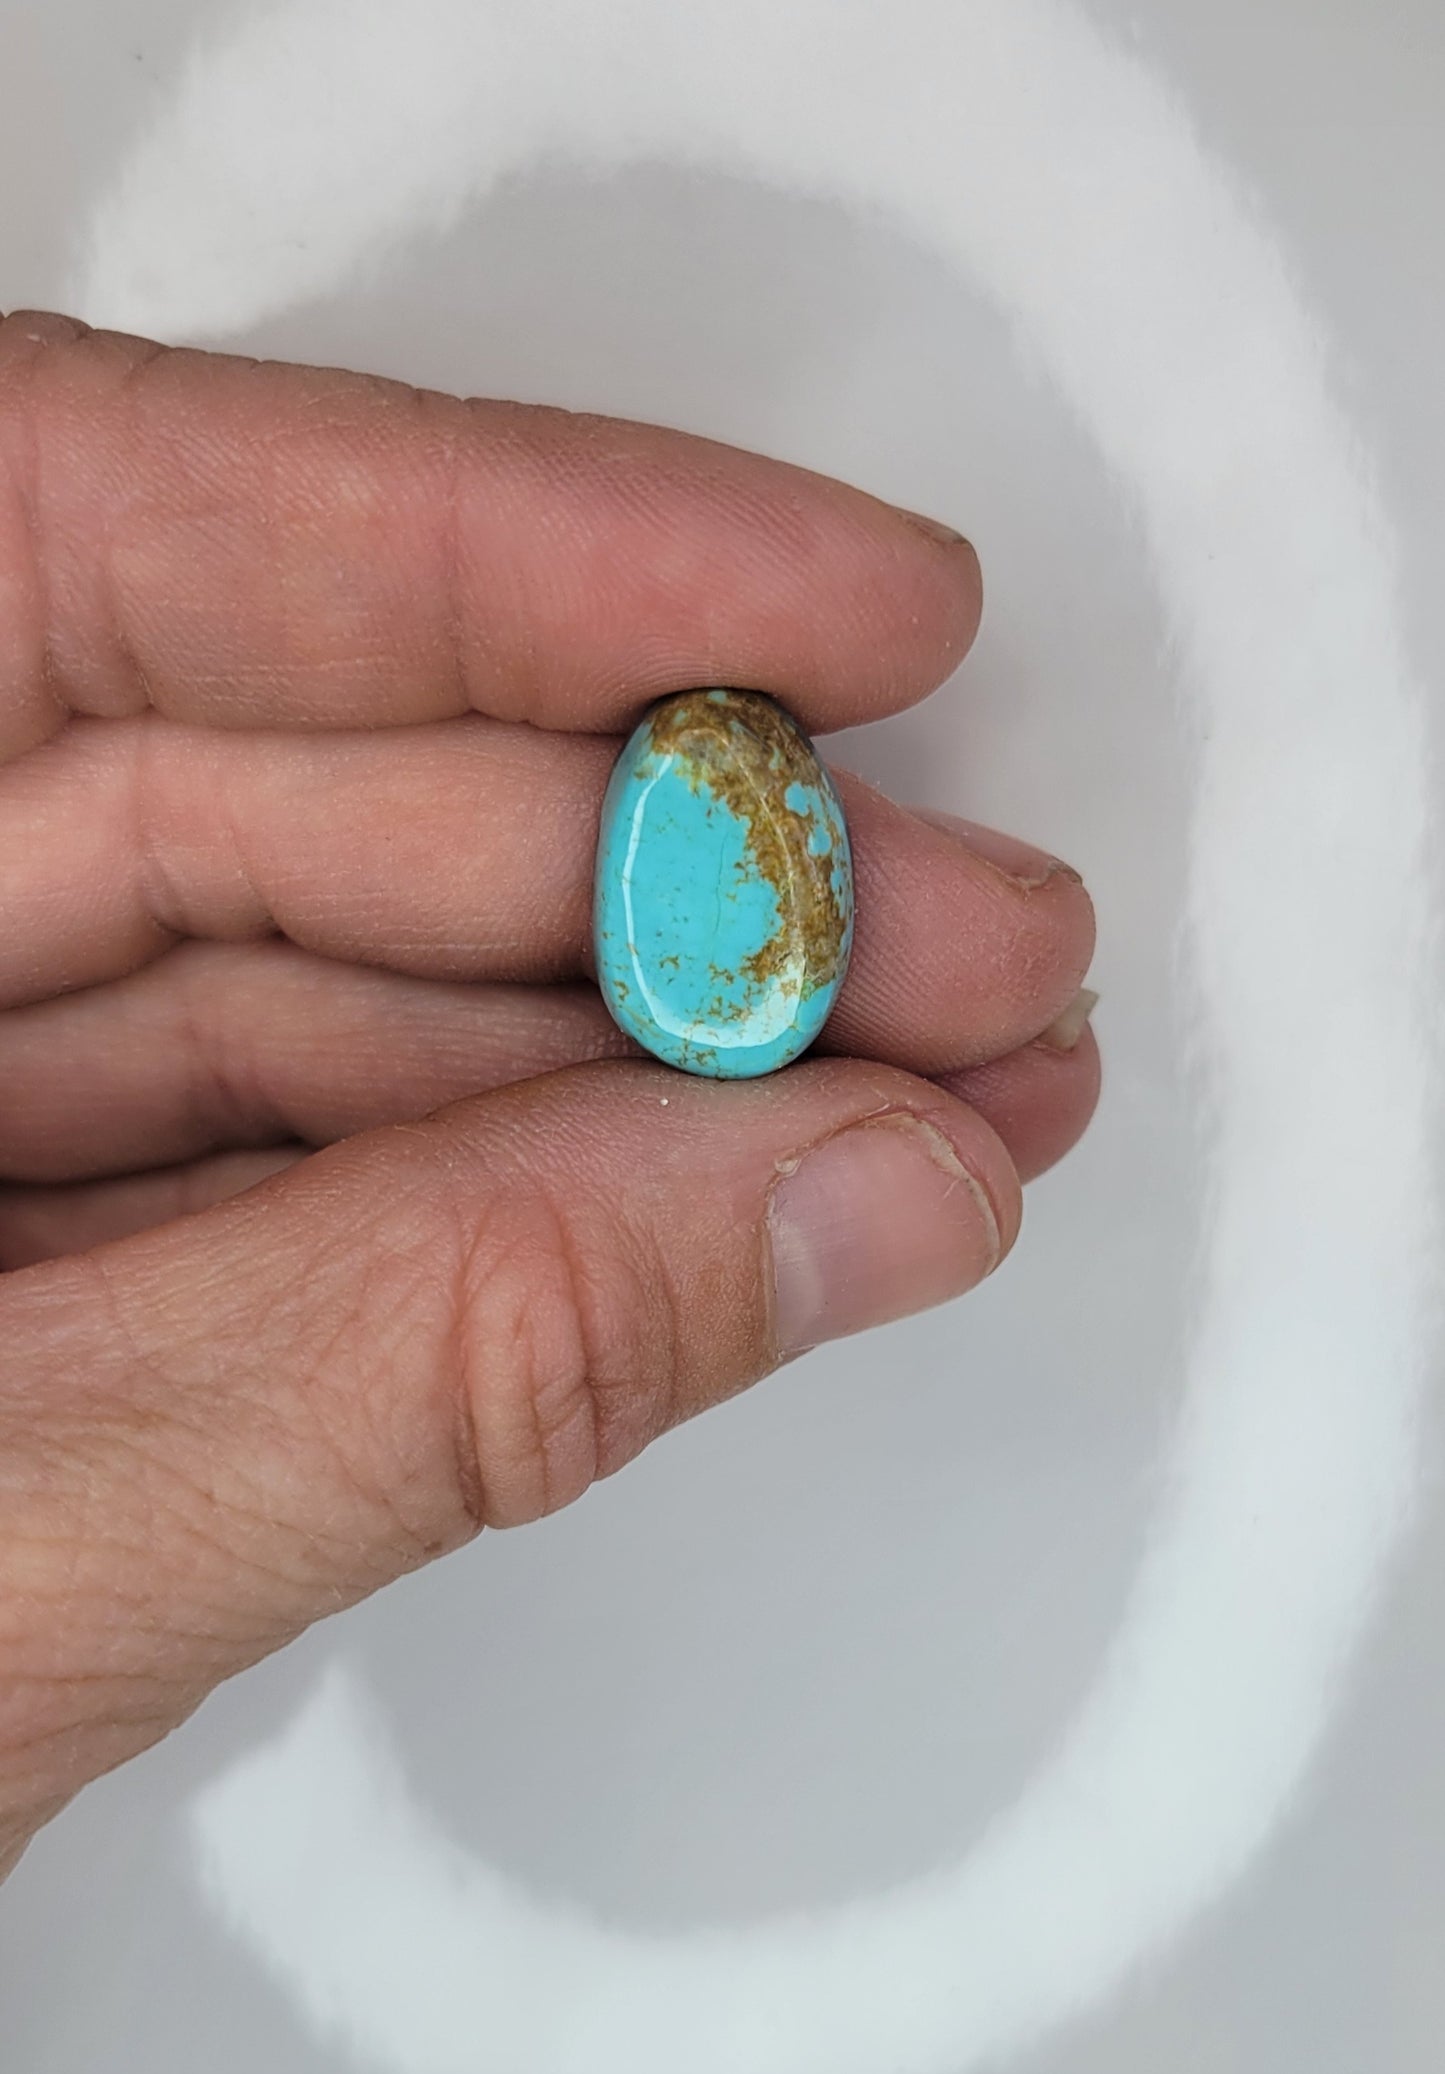 Number 8 Mine Turquoise Cabochon